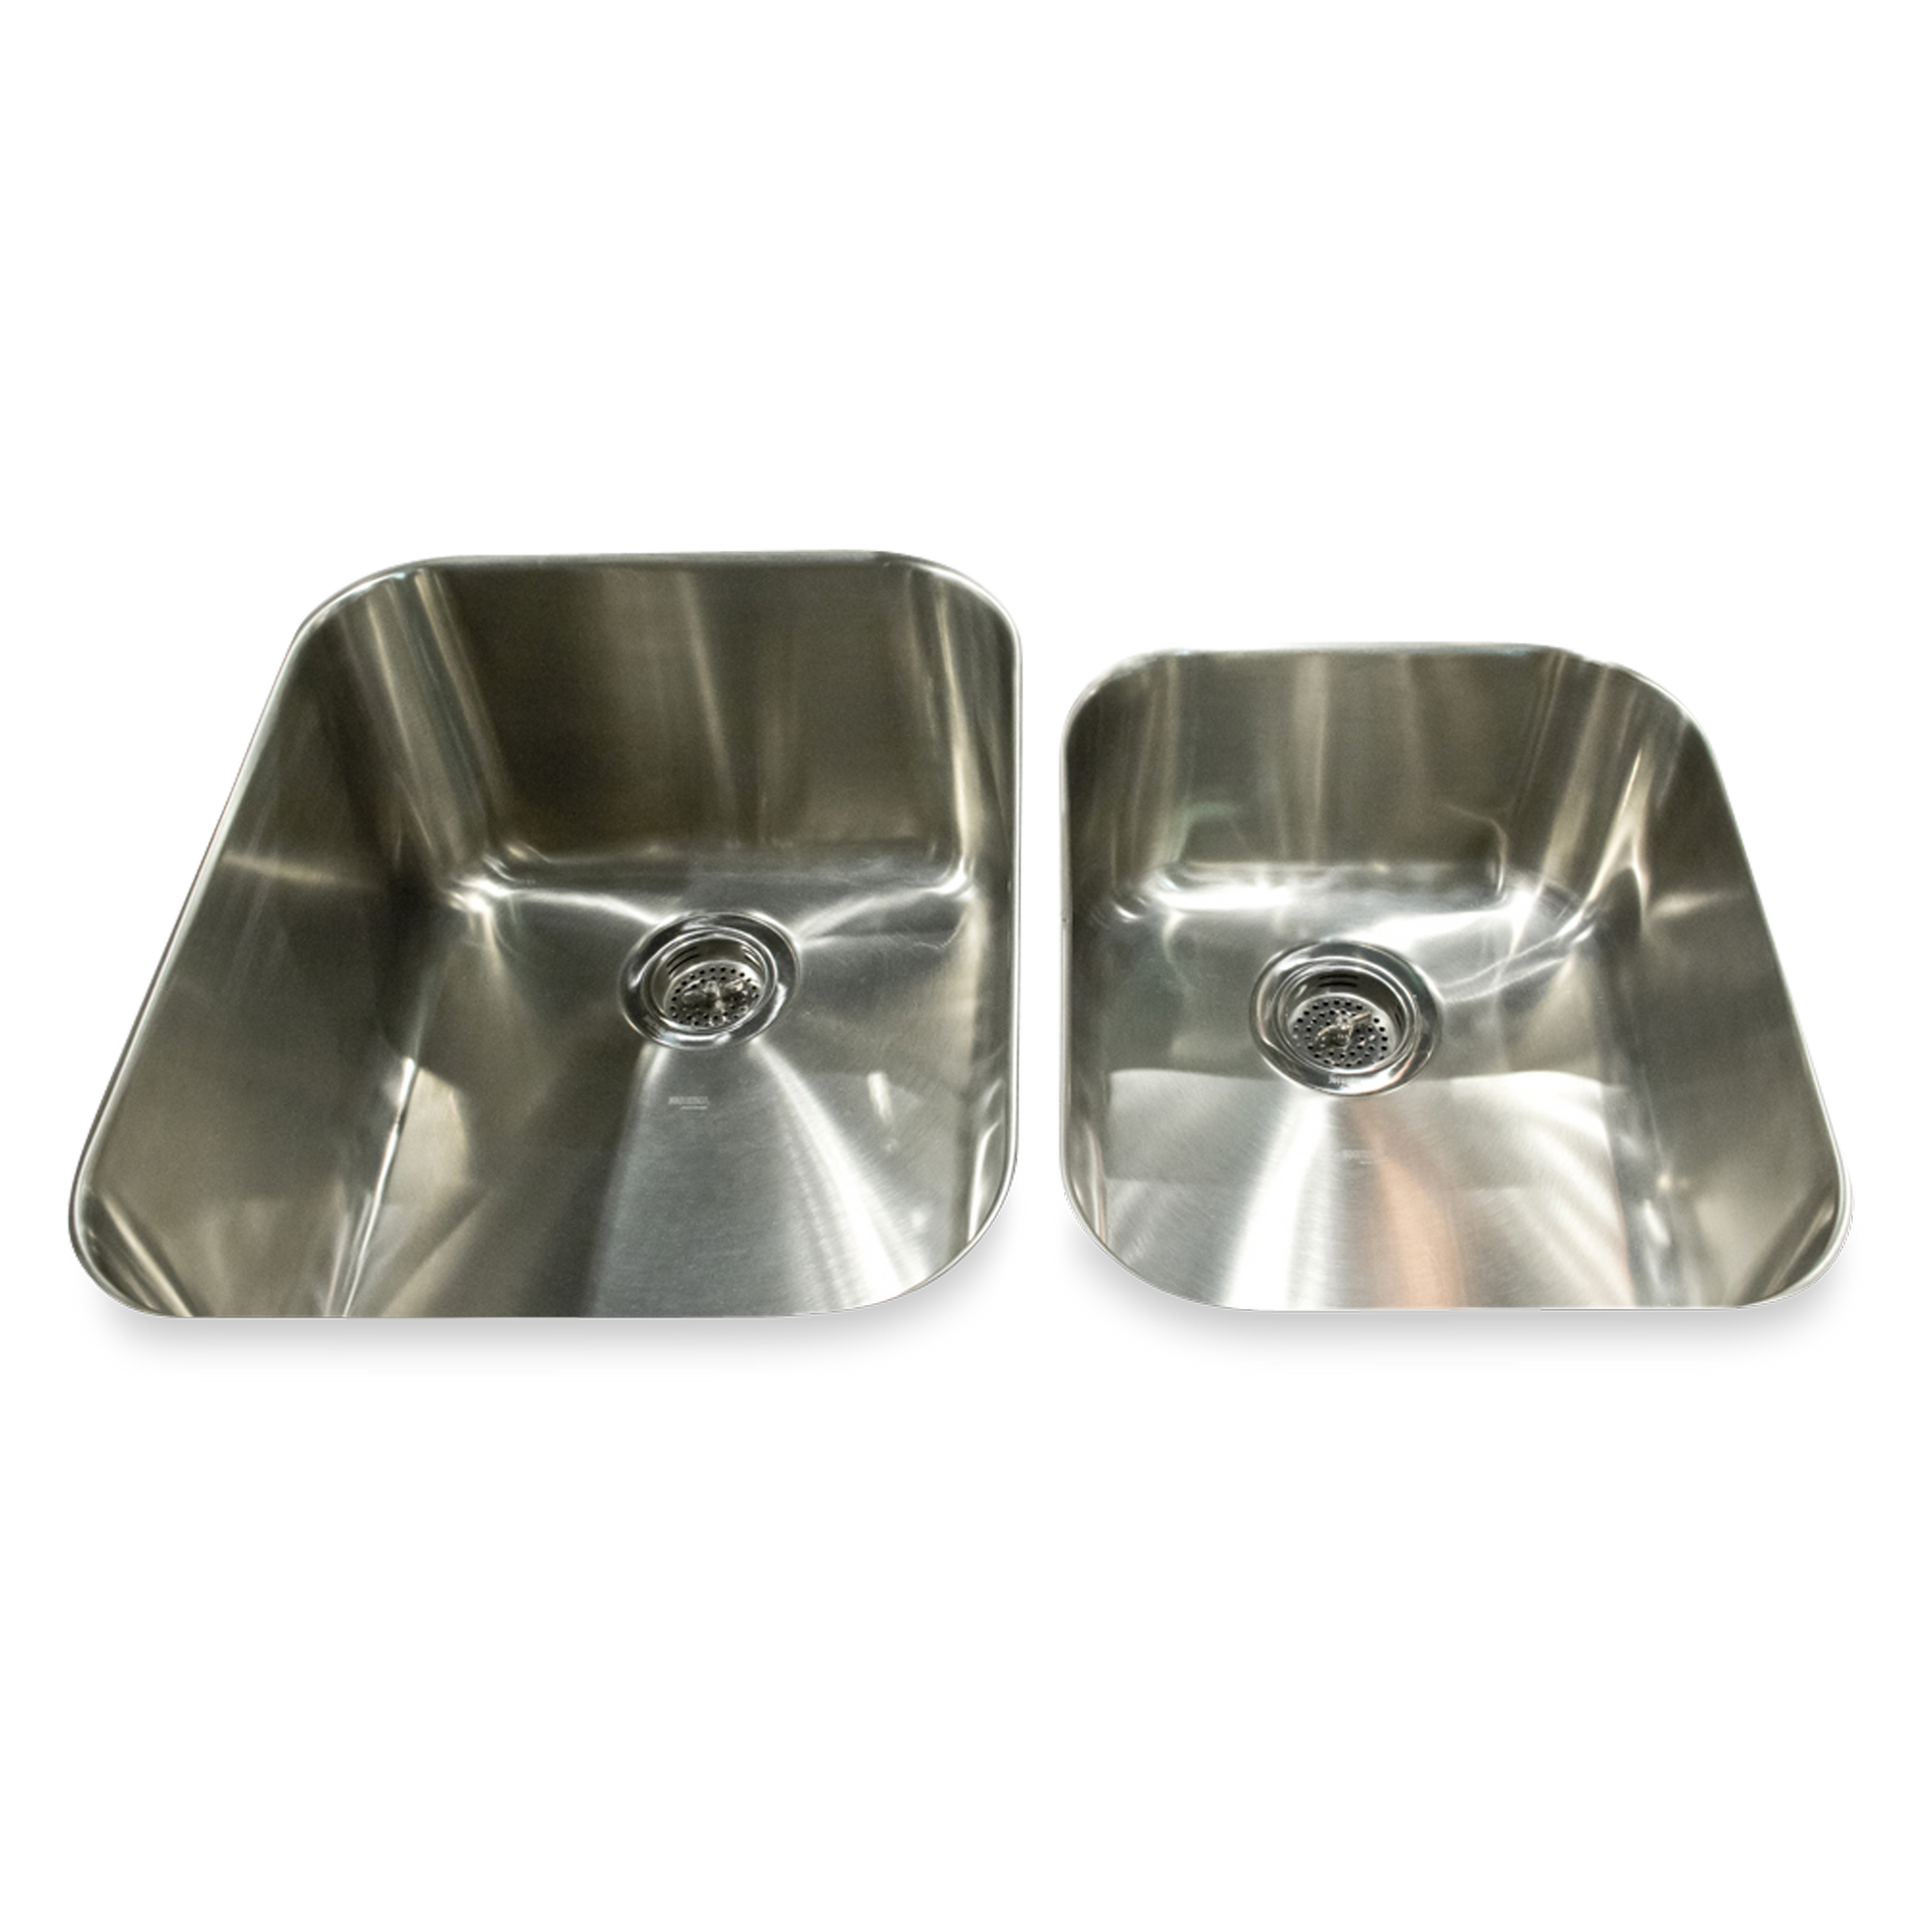 The Troy is an underlount, stainless steel sink.